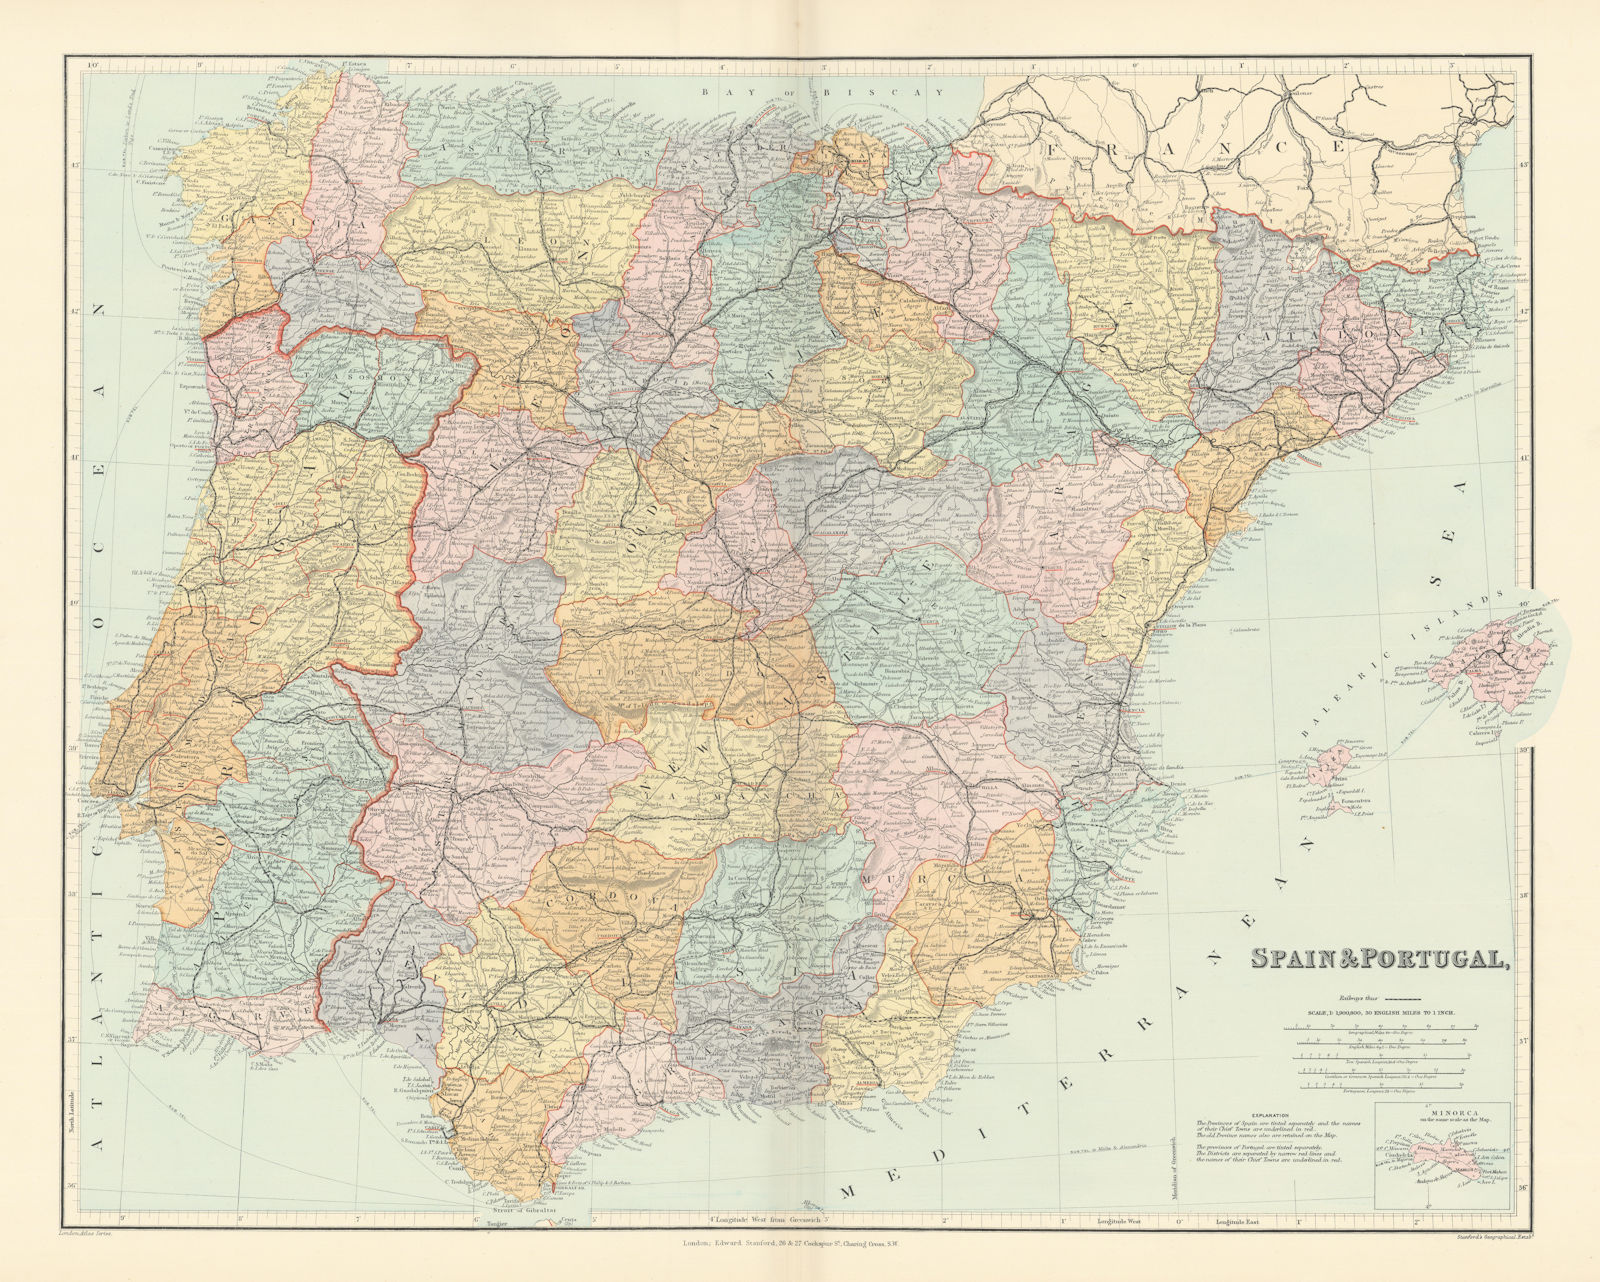 Spain & Portugal. Iberia. Railways. Large 52x65cm. STANFORD 1896 old map